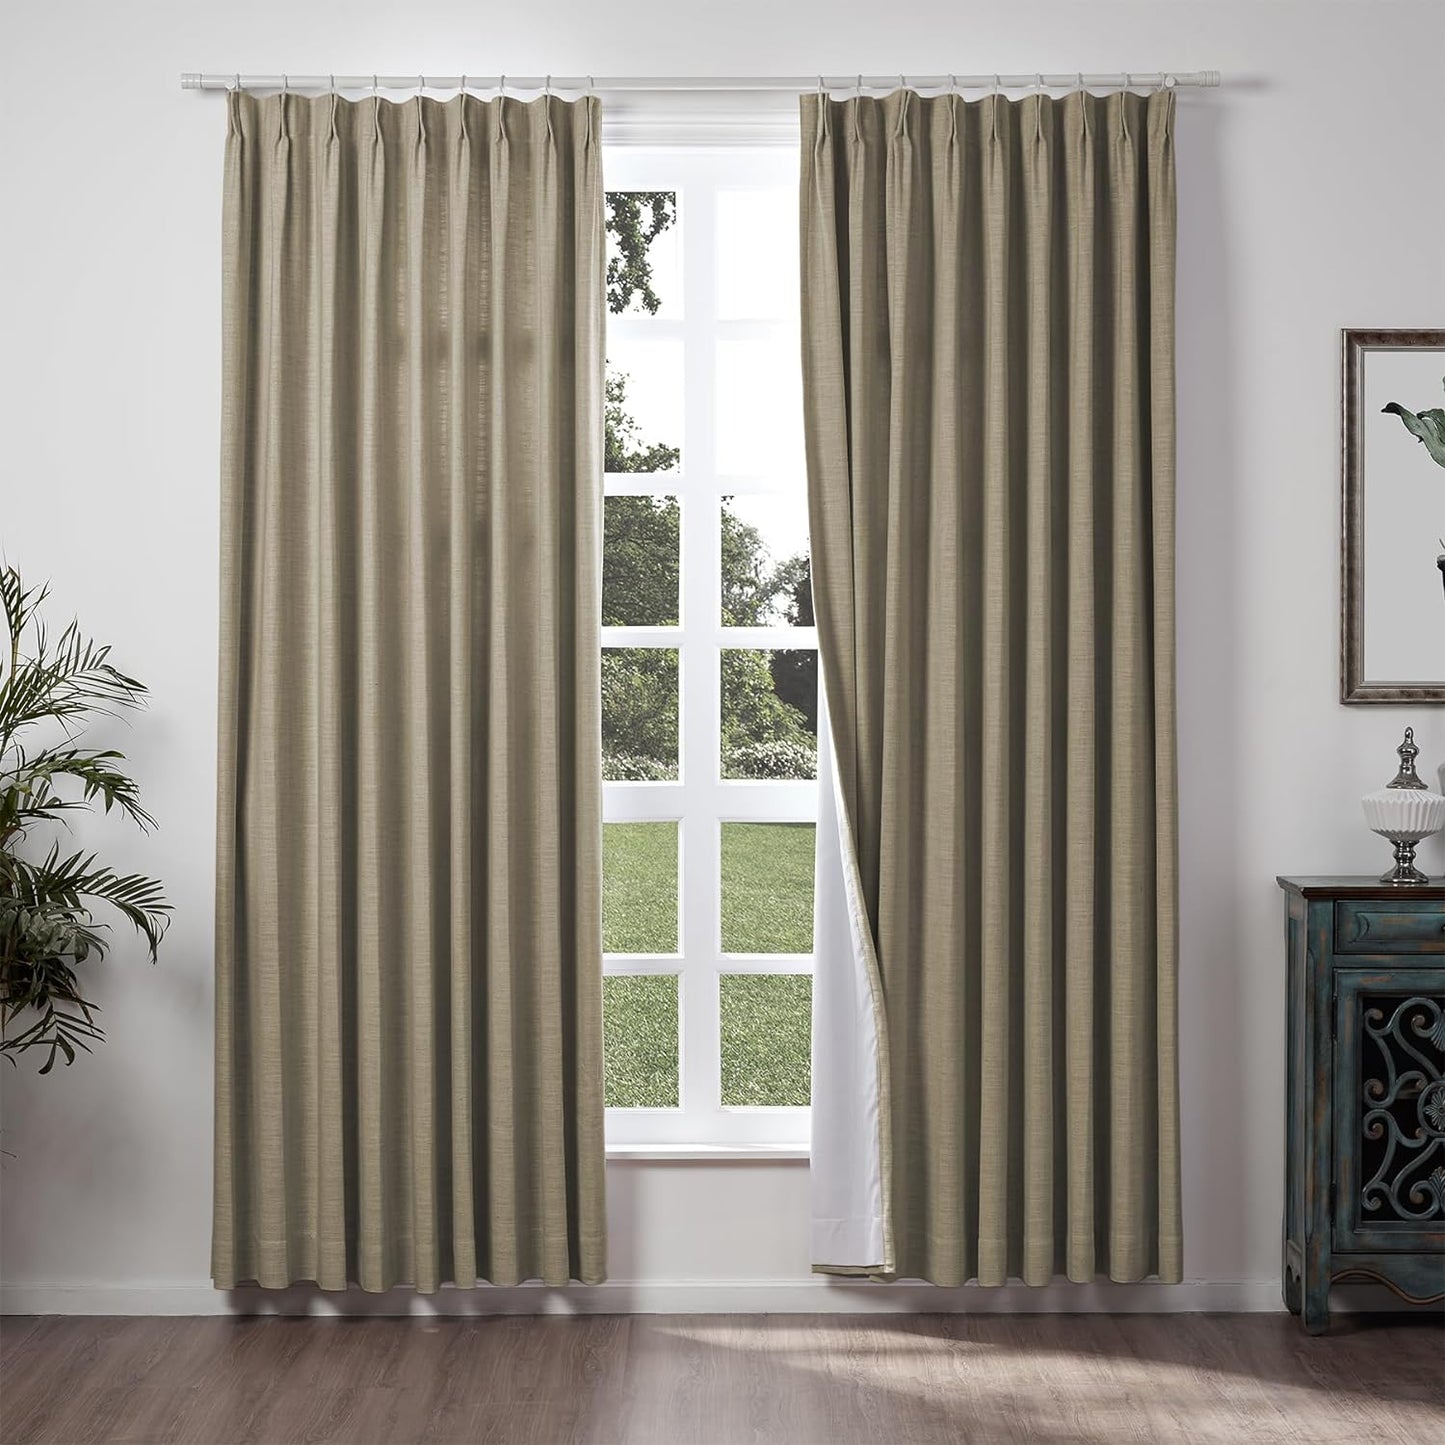 Chadmade 50" W X 84" L Polyester Linen Drape with Blackout Lining Pinch Pleat Curtain for Sliding Door Patio Door Living Room Bedroom, (1 Panel) Beige White Liz Collection  ChadMade Oak (10) 72Wx84L 